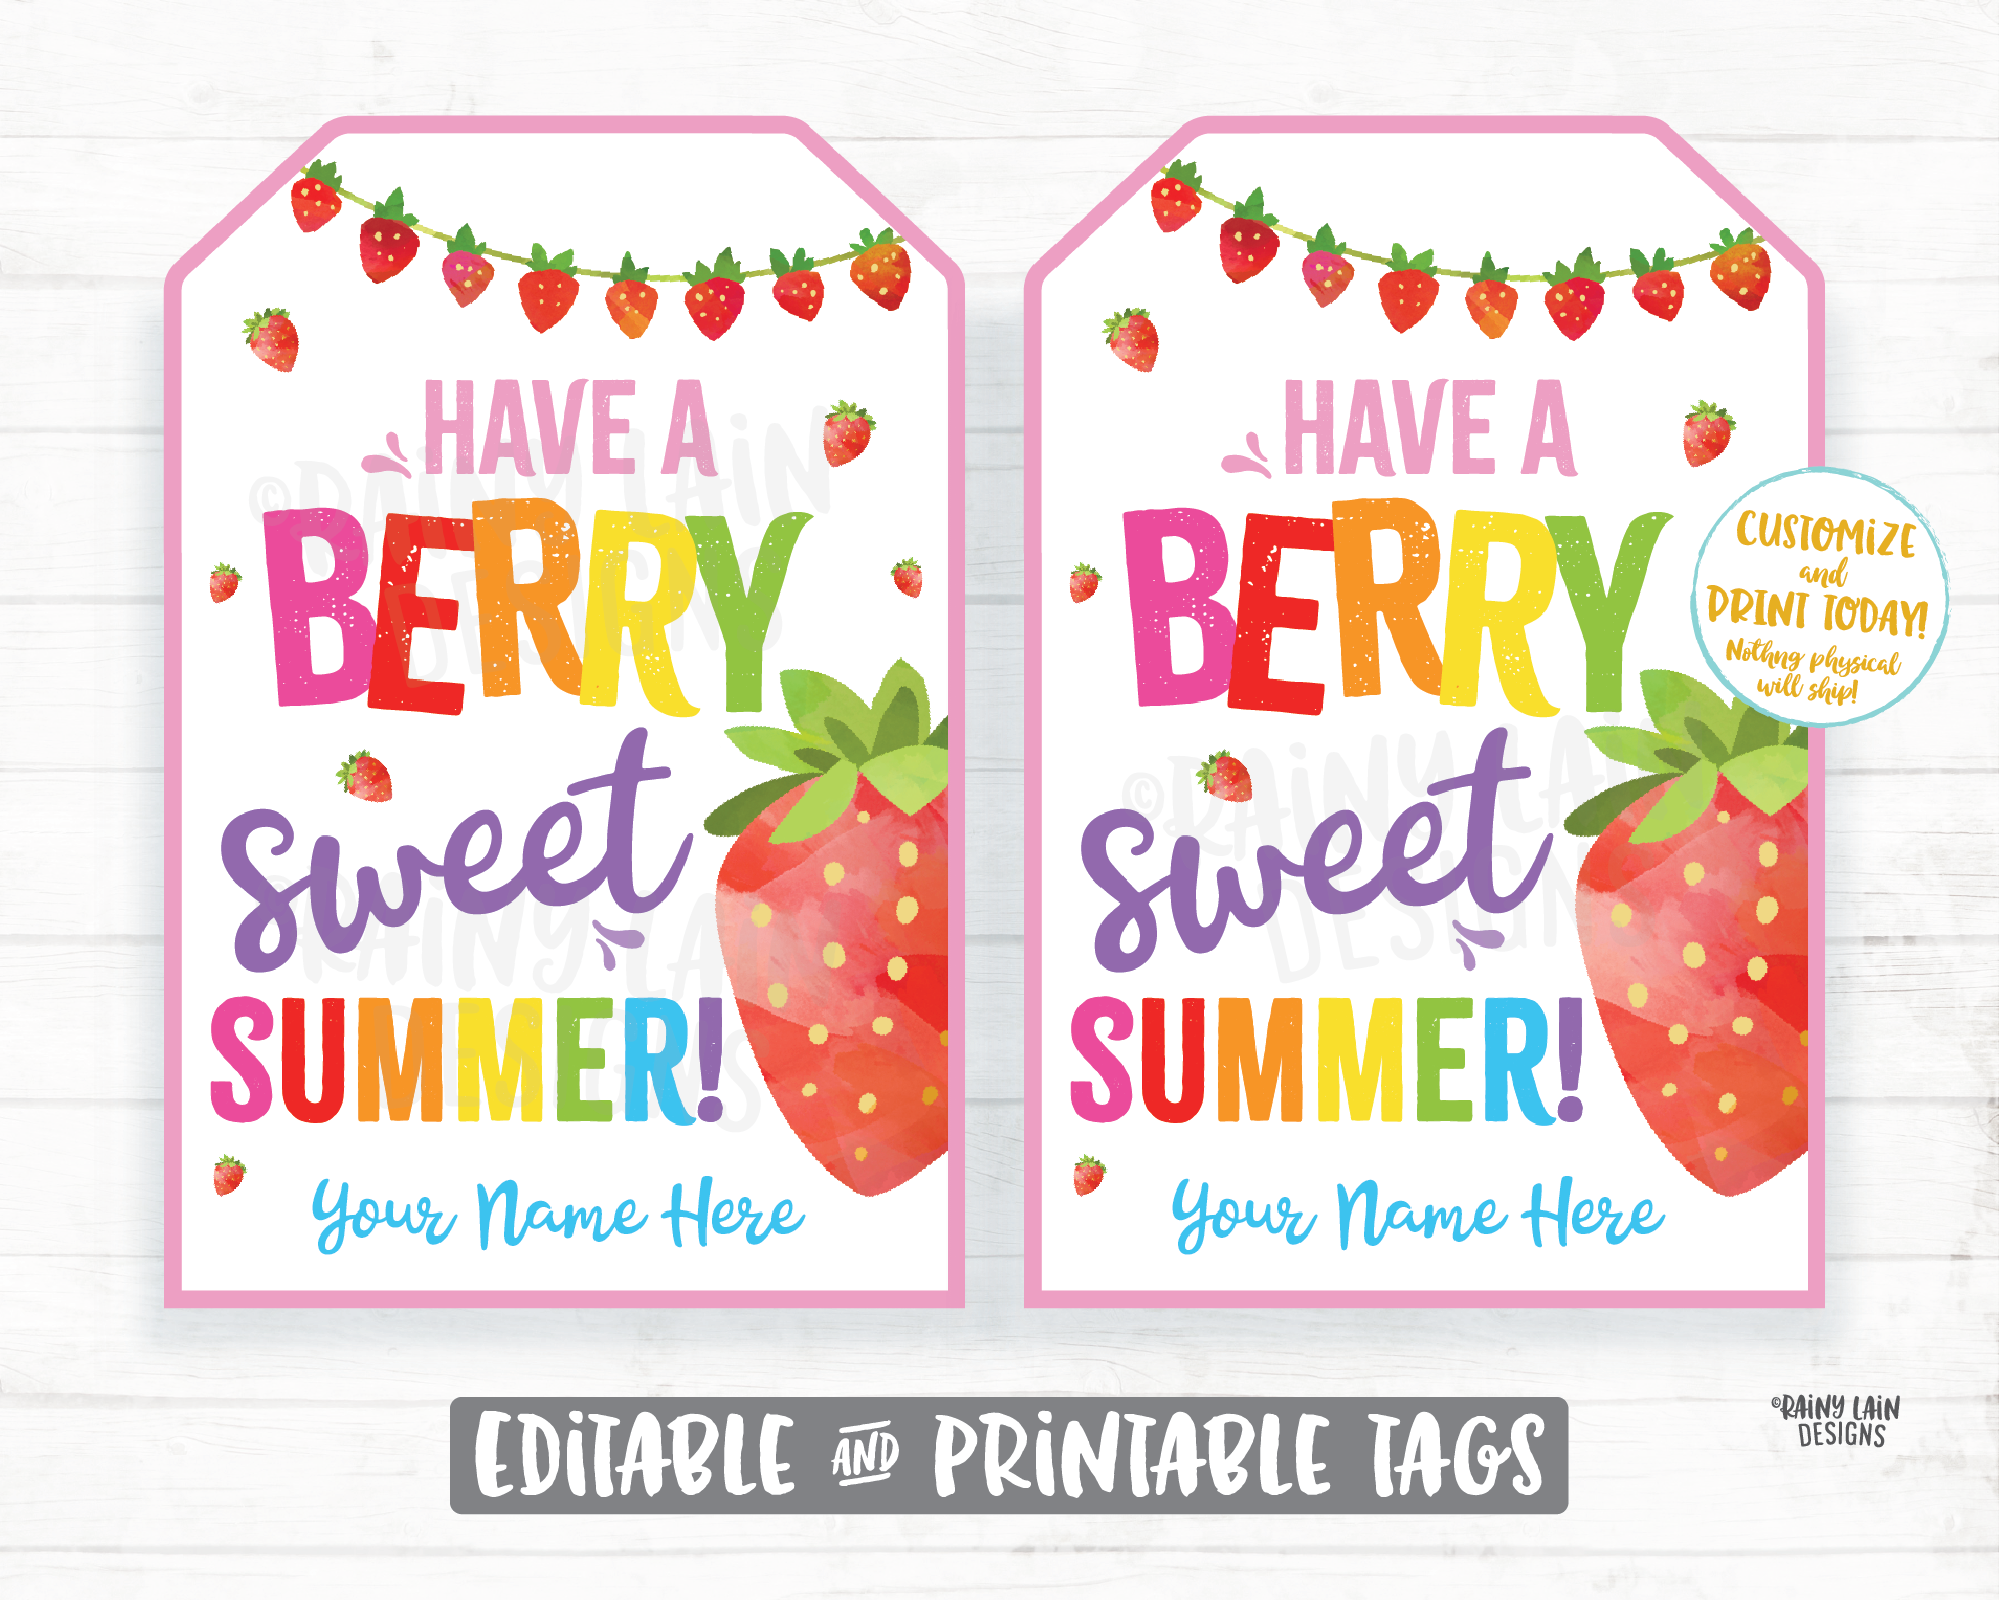 have-a-berry-sweet-summer-tag-end-of-school-year-gift-tags-preschool-s-rainy-lain-designs-llc